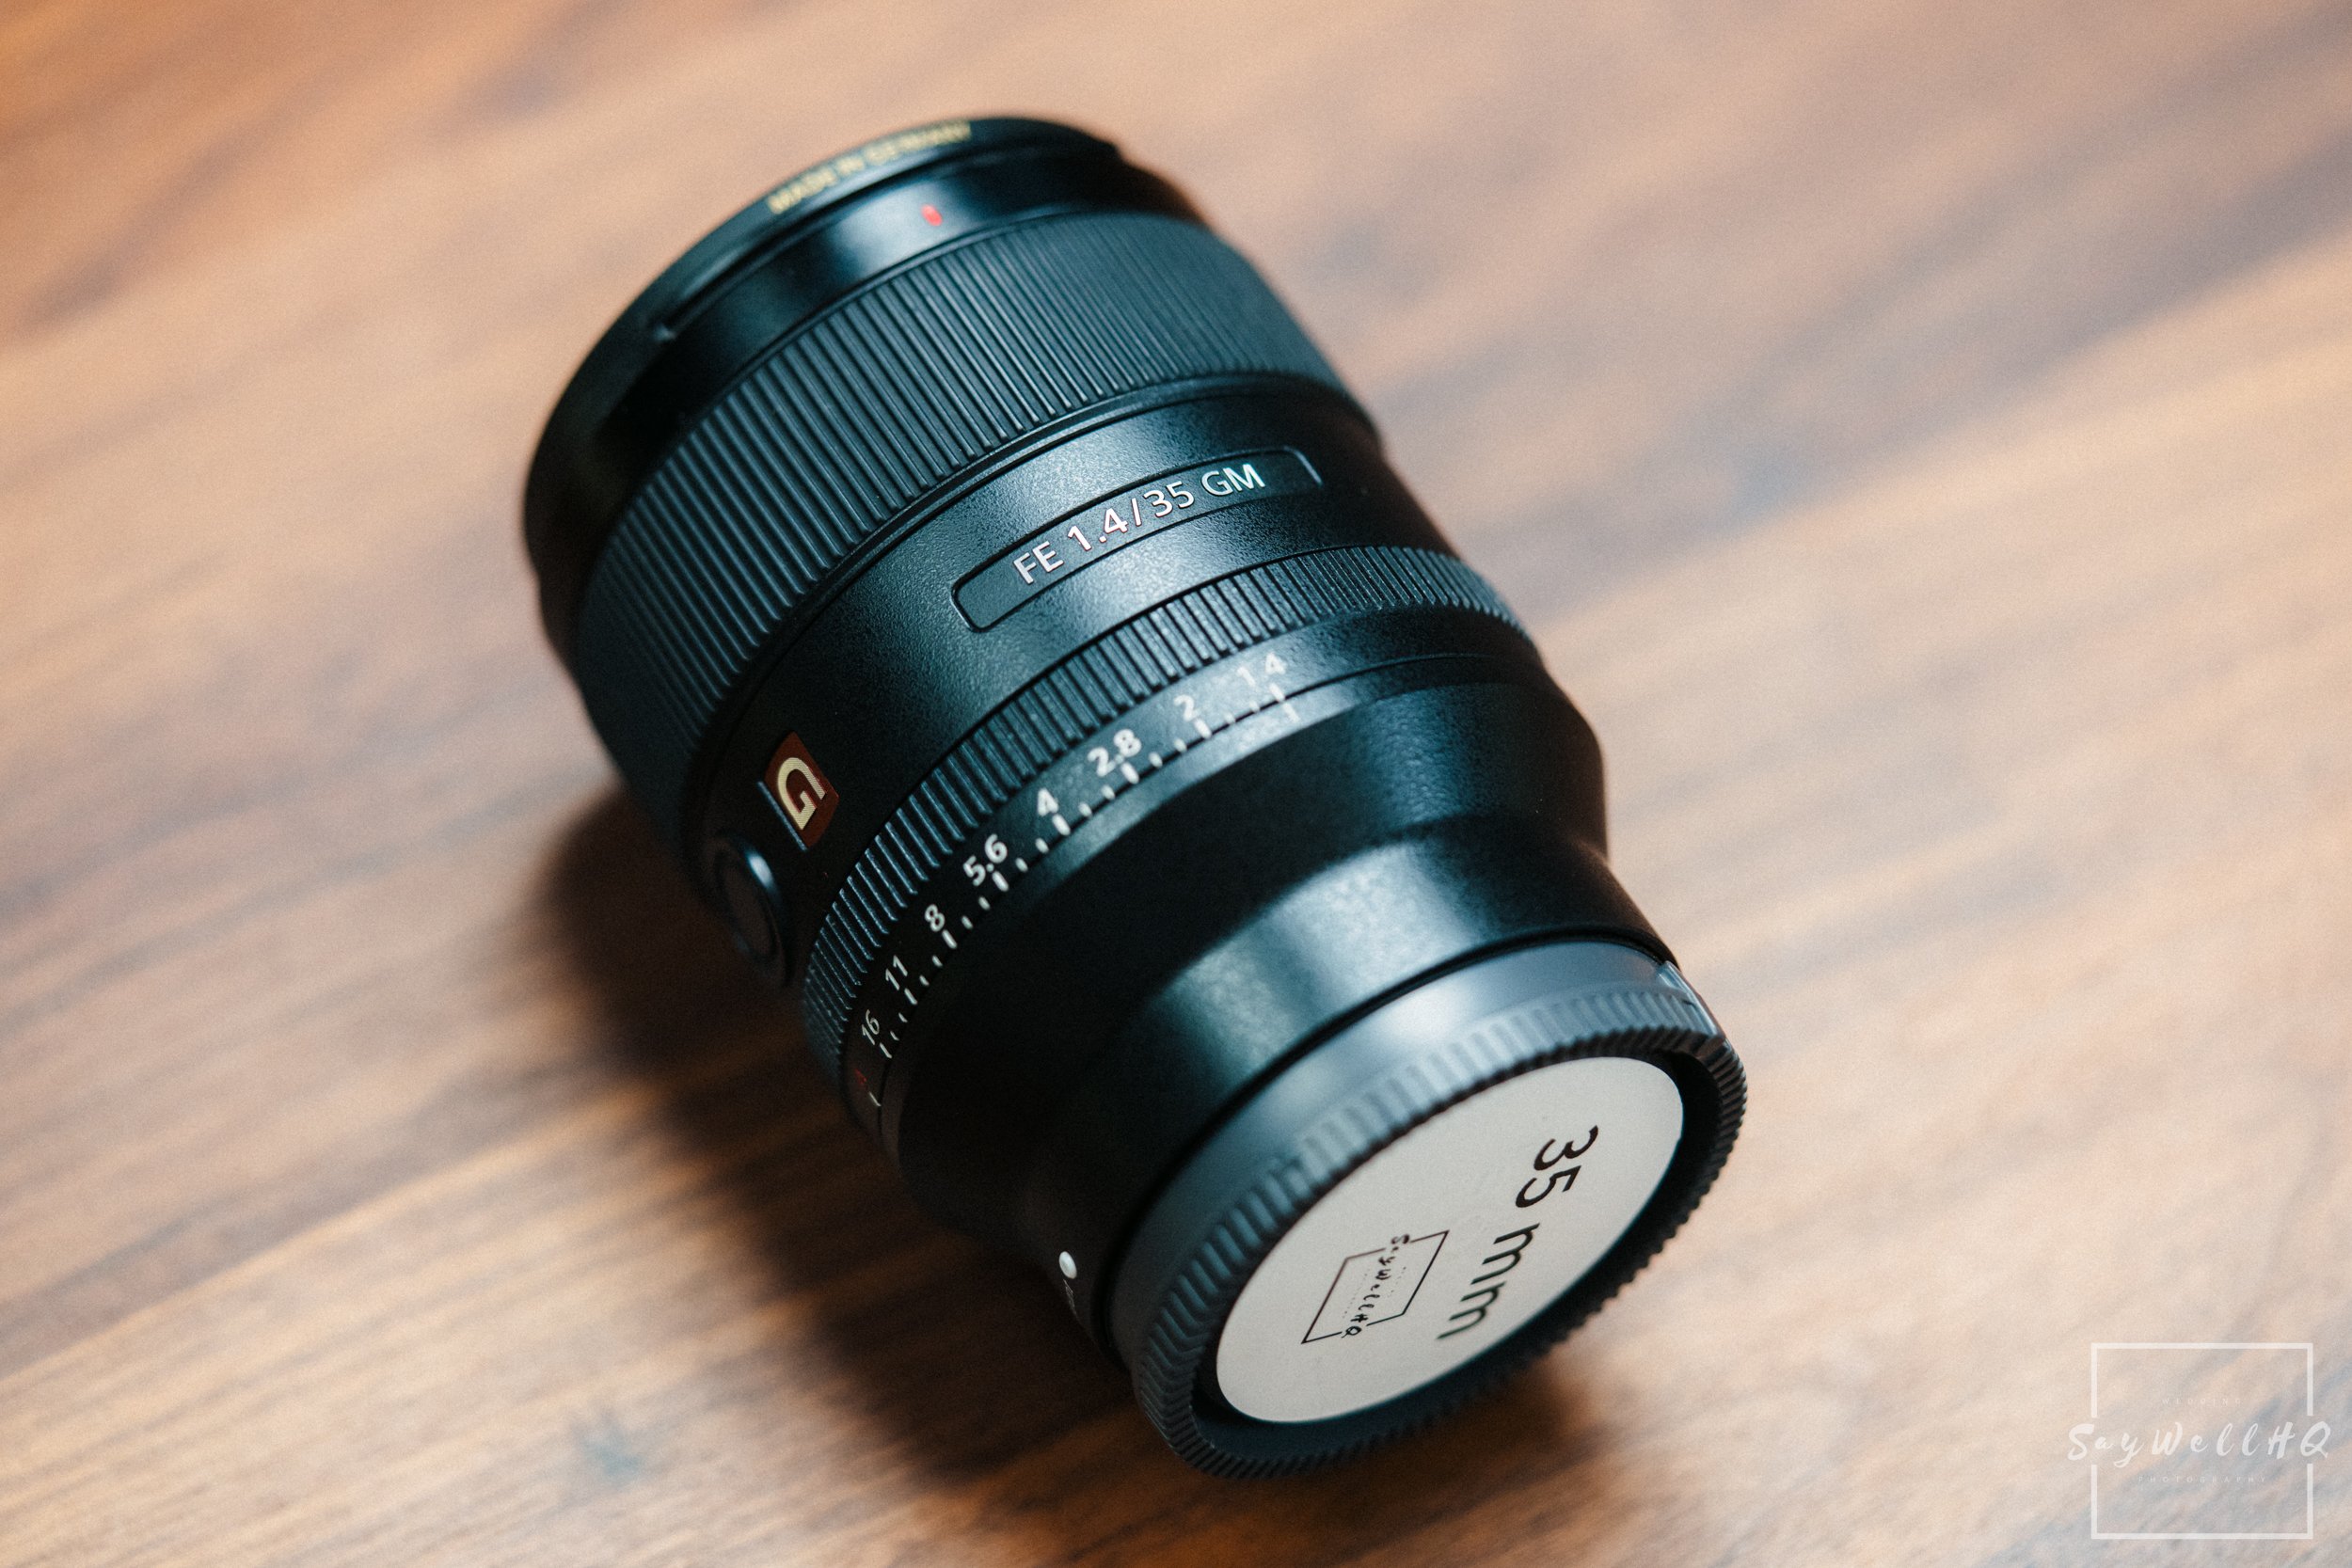 Sony 35mm f/1.4 GM Versus Sony 24mm f/1.4 GM: Which Is the Best for You?